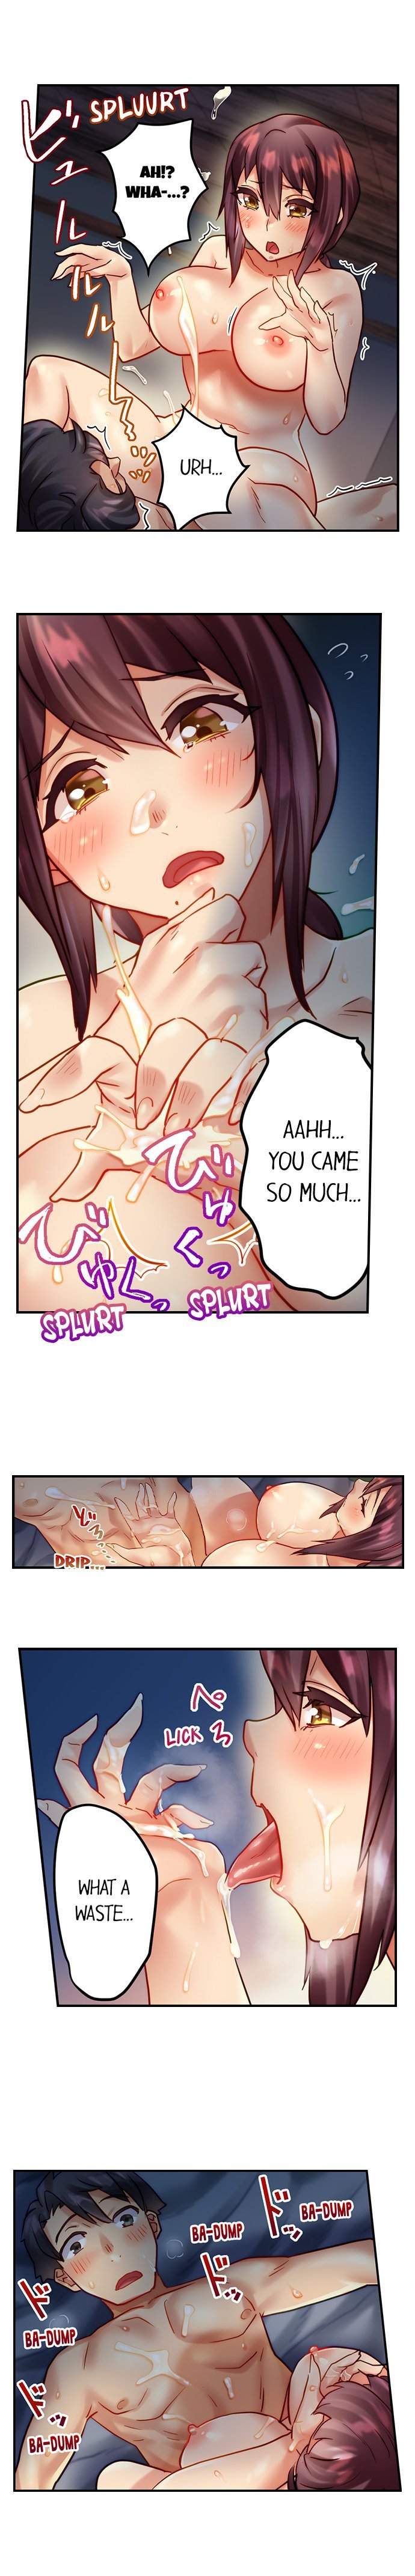 risky-family-planning-chap-3-5